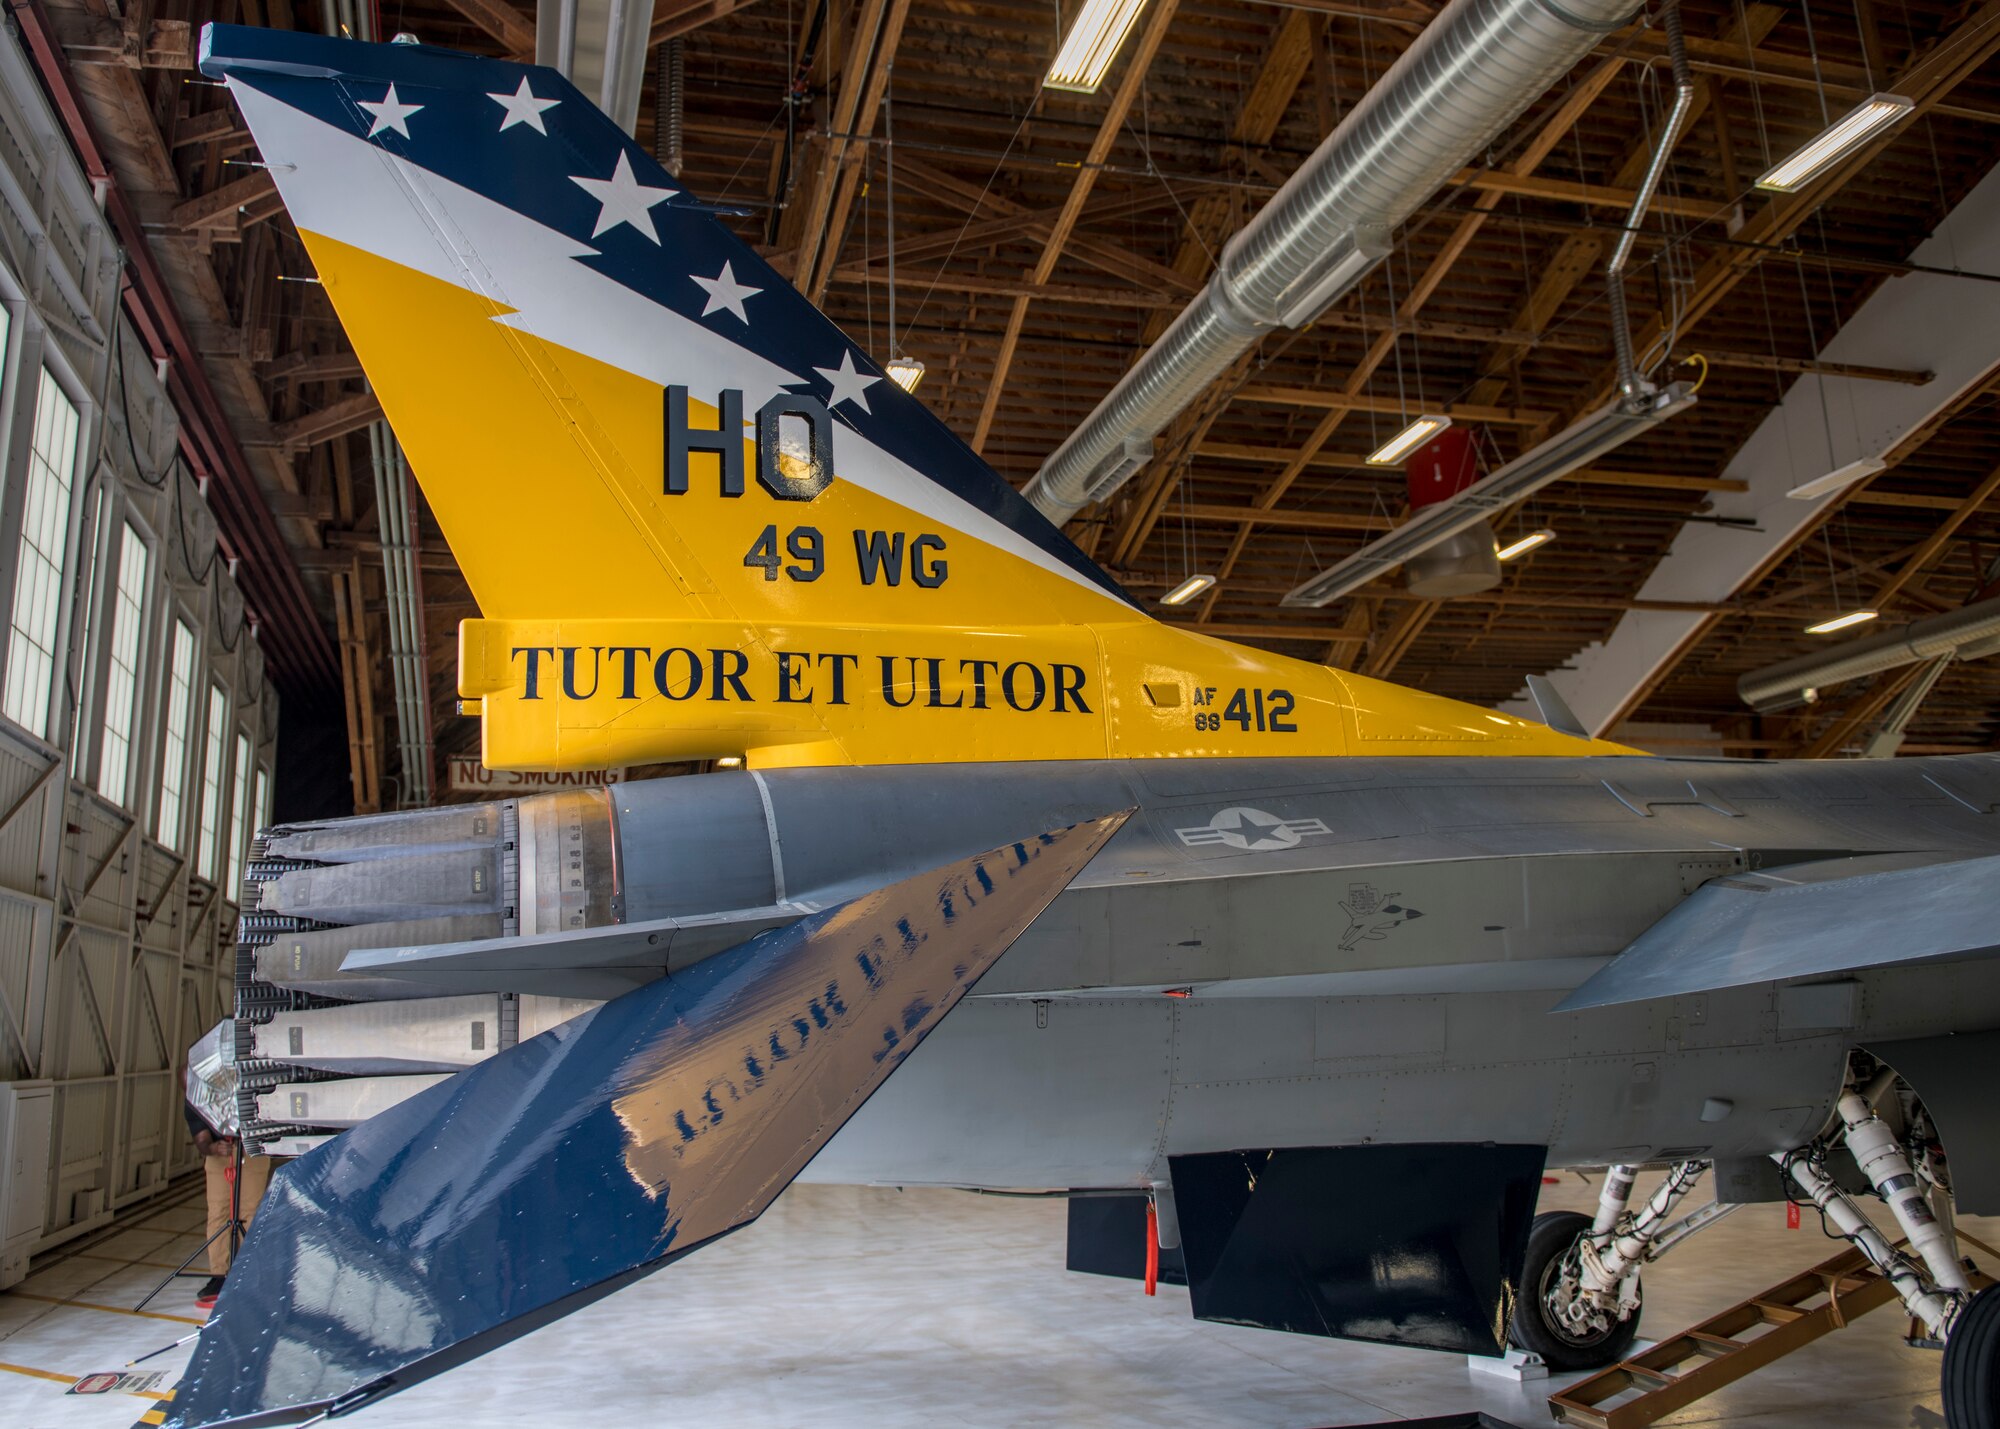 The 49th Wing’s newly painted Flagship was revealed at the Air Force Ball, Sept. 14, 2019, on Holloman Air Force Base, N.M. This is the first time Holloman accomplished a custom paint for its aircraft. (U.S. Air Force photo by Airman 1st Class Kindra Stewart)